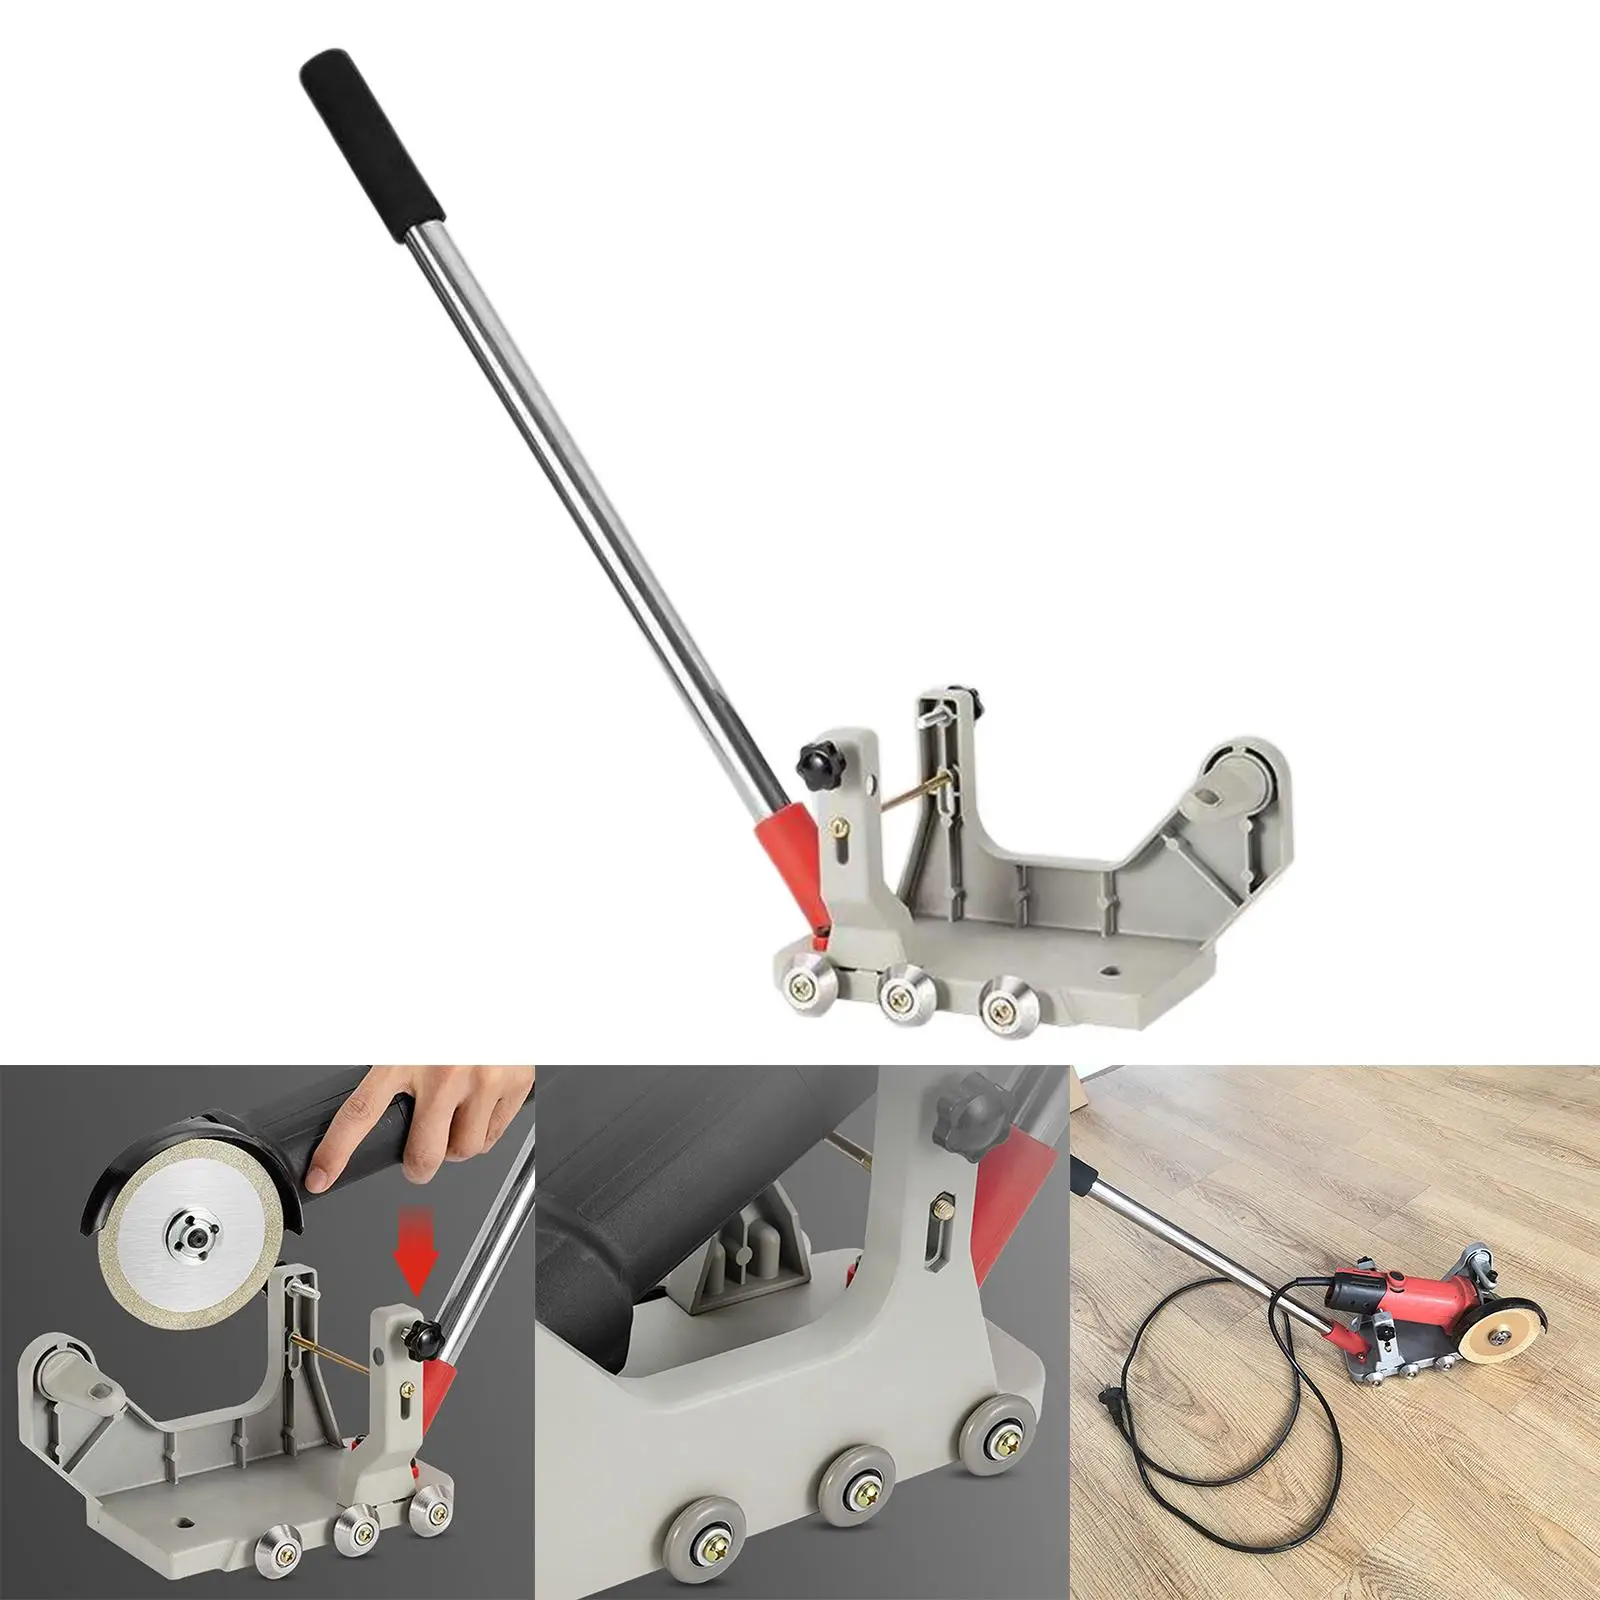 Handheld Floor Tile Cleaning Bracket Reusable Simple to Use Durable Tile Seam Cleaning Machine for Household Kitchen Porcelain